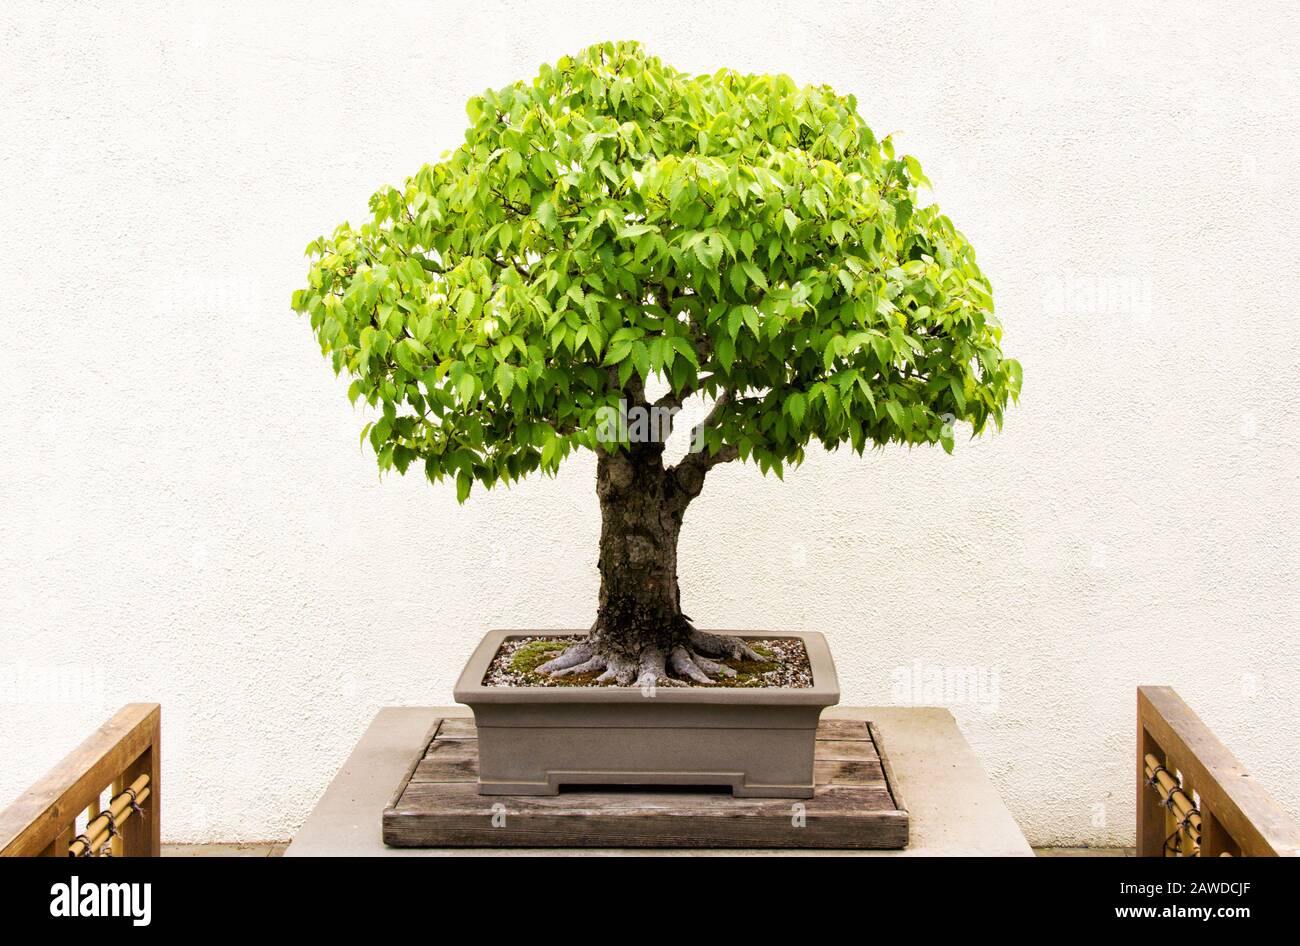 Miniature matured green colored Japanese Zelkova bonsai tree growing in a potted container. Been in training since 1895. Stock Photo